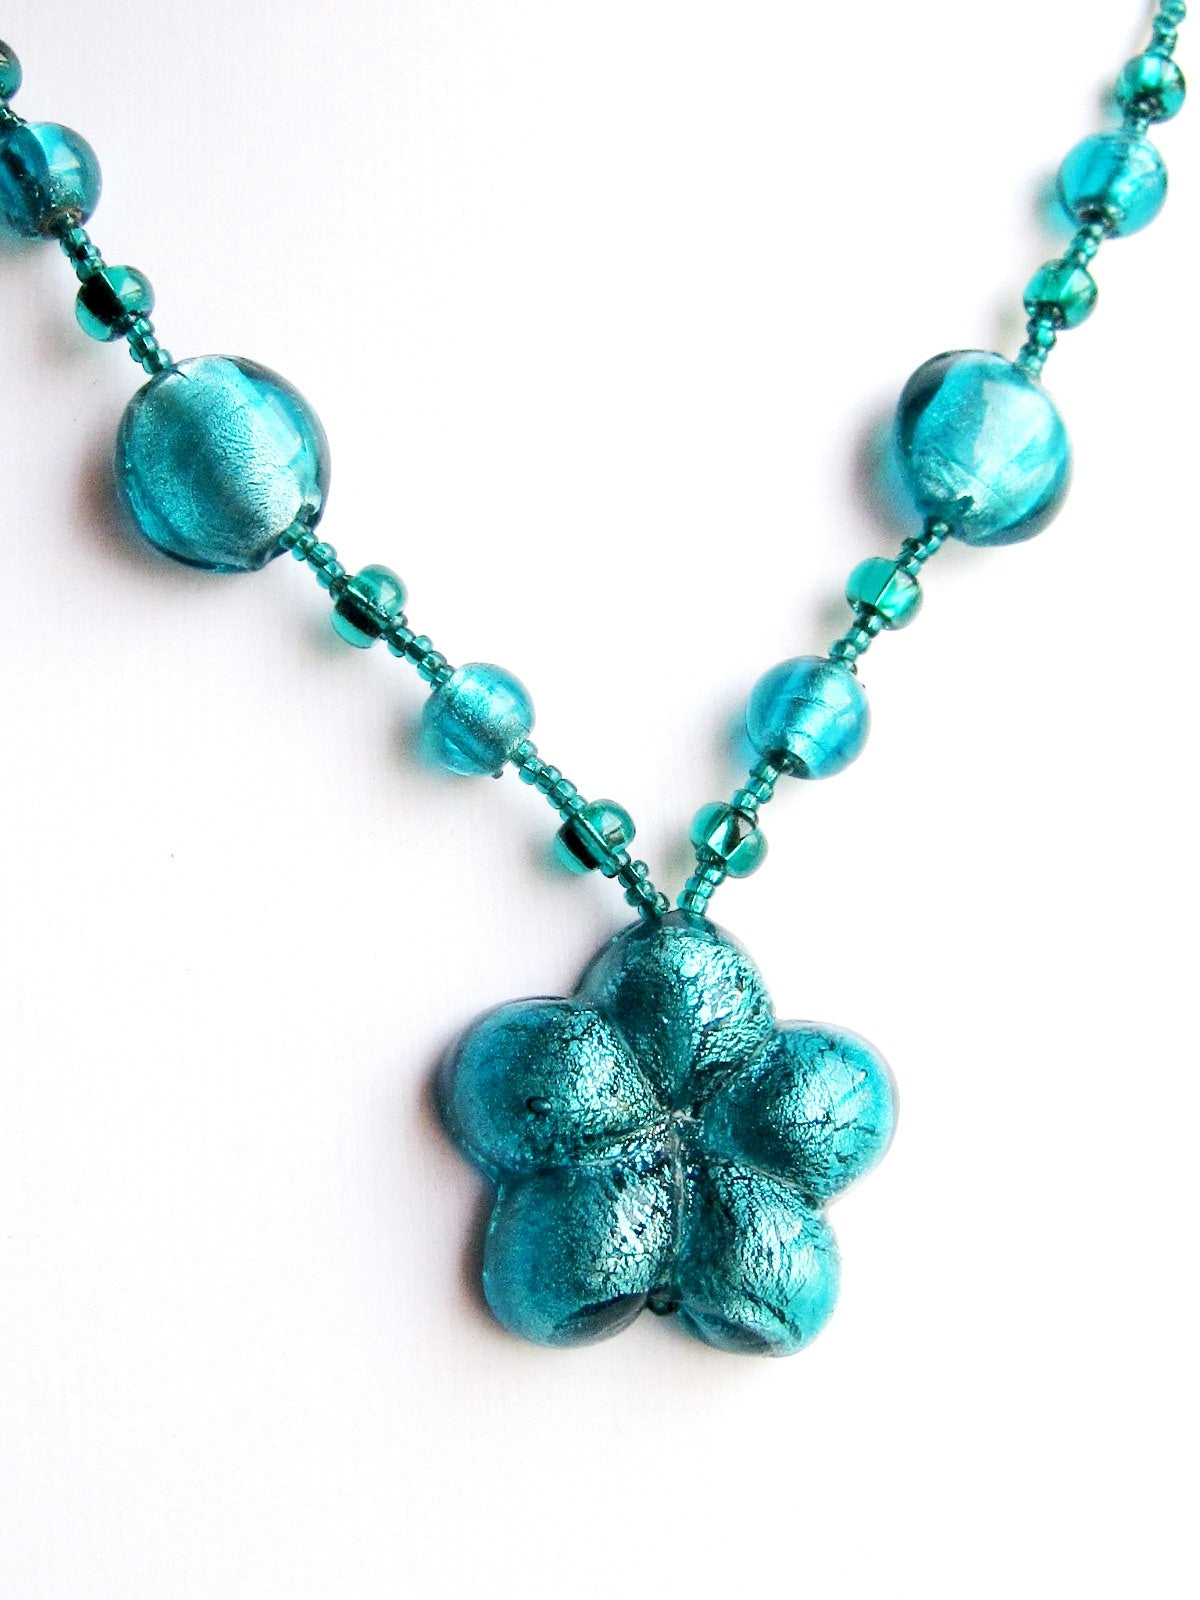 Luminous Teal Flower Necklace and Dangle Earring Set, a beaded teal, blue foil glass flower Necklace 